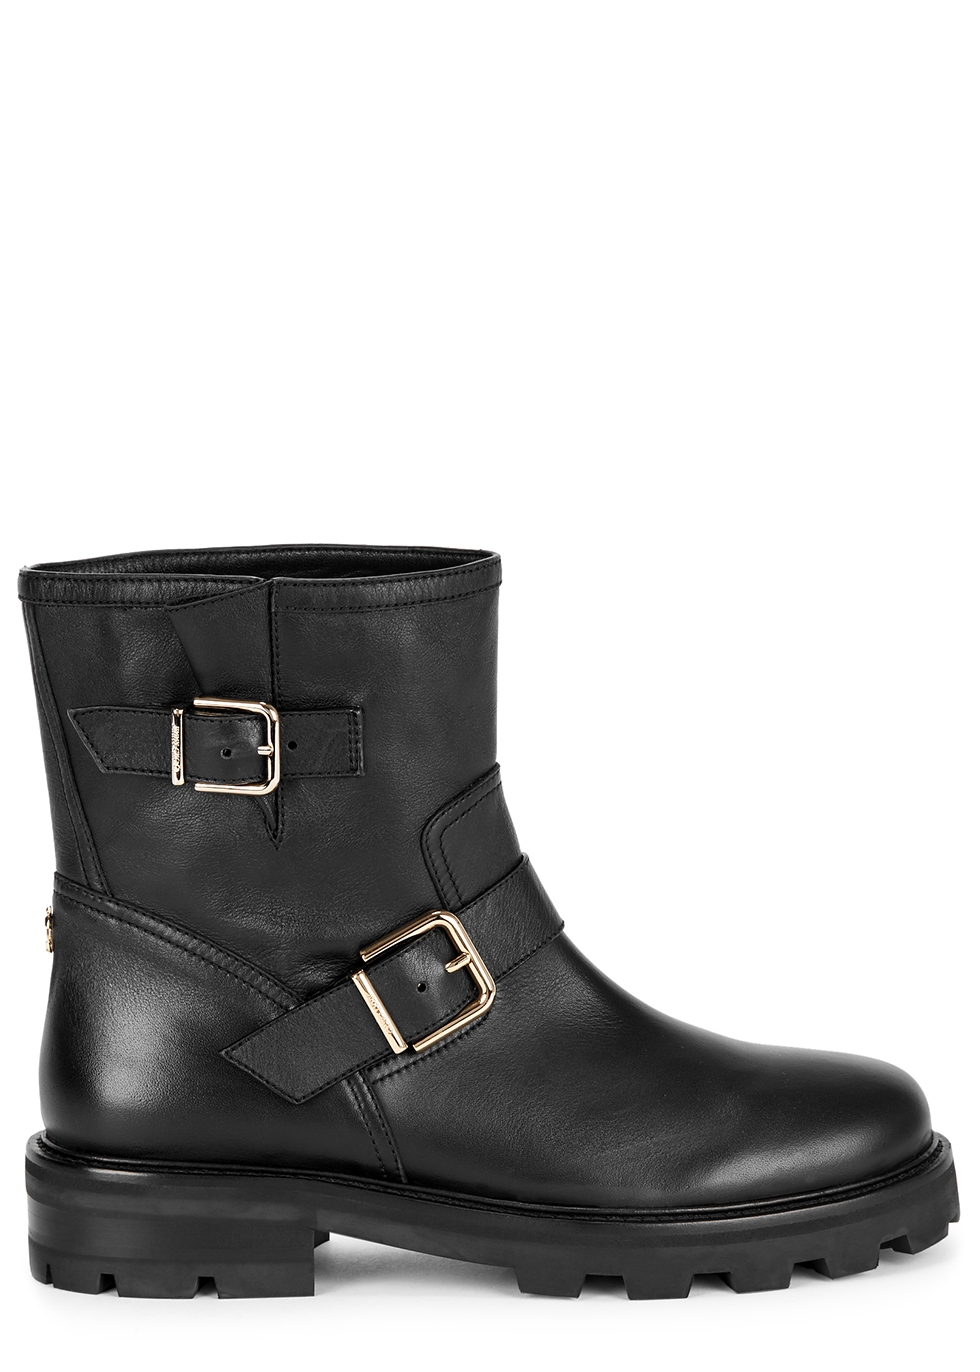 Jimmy Choo Youth black leather ankle 